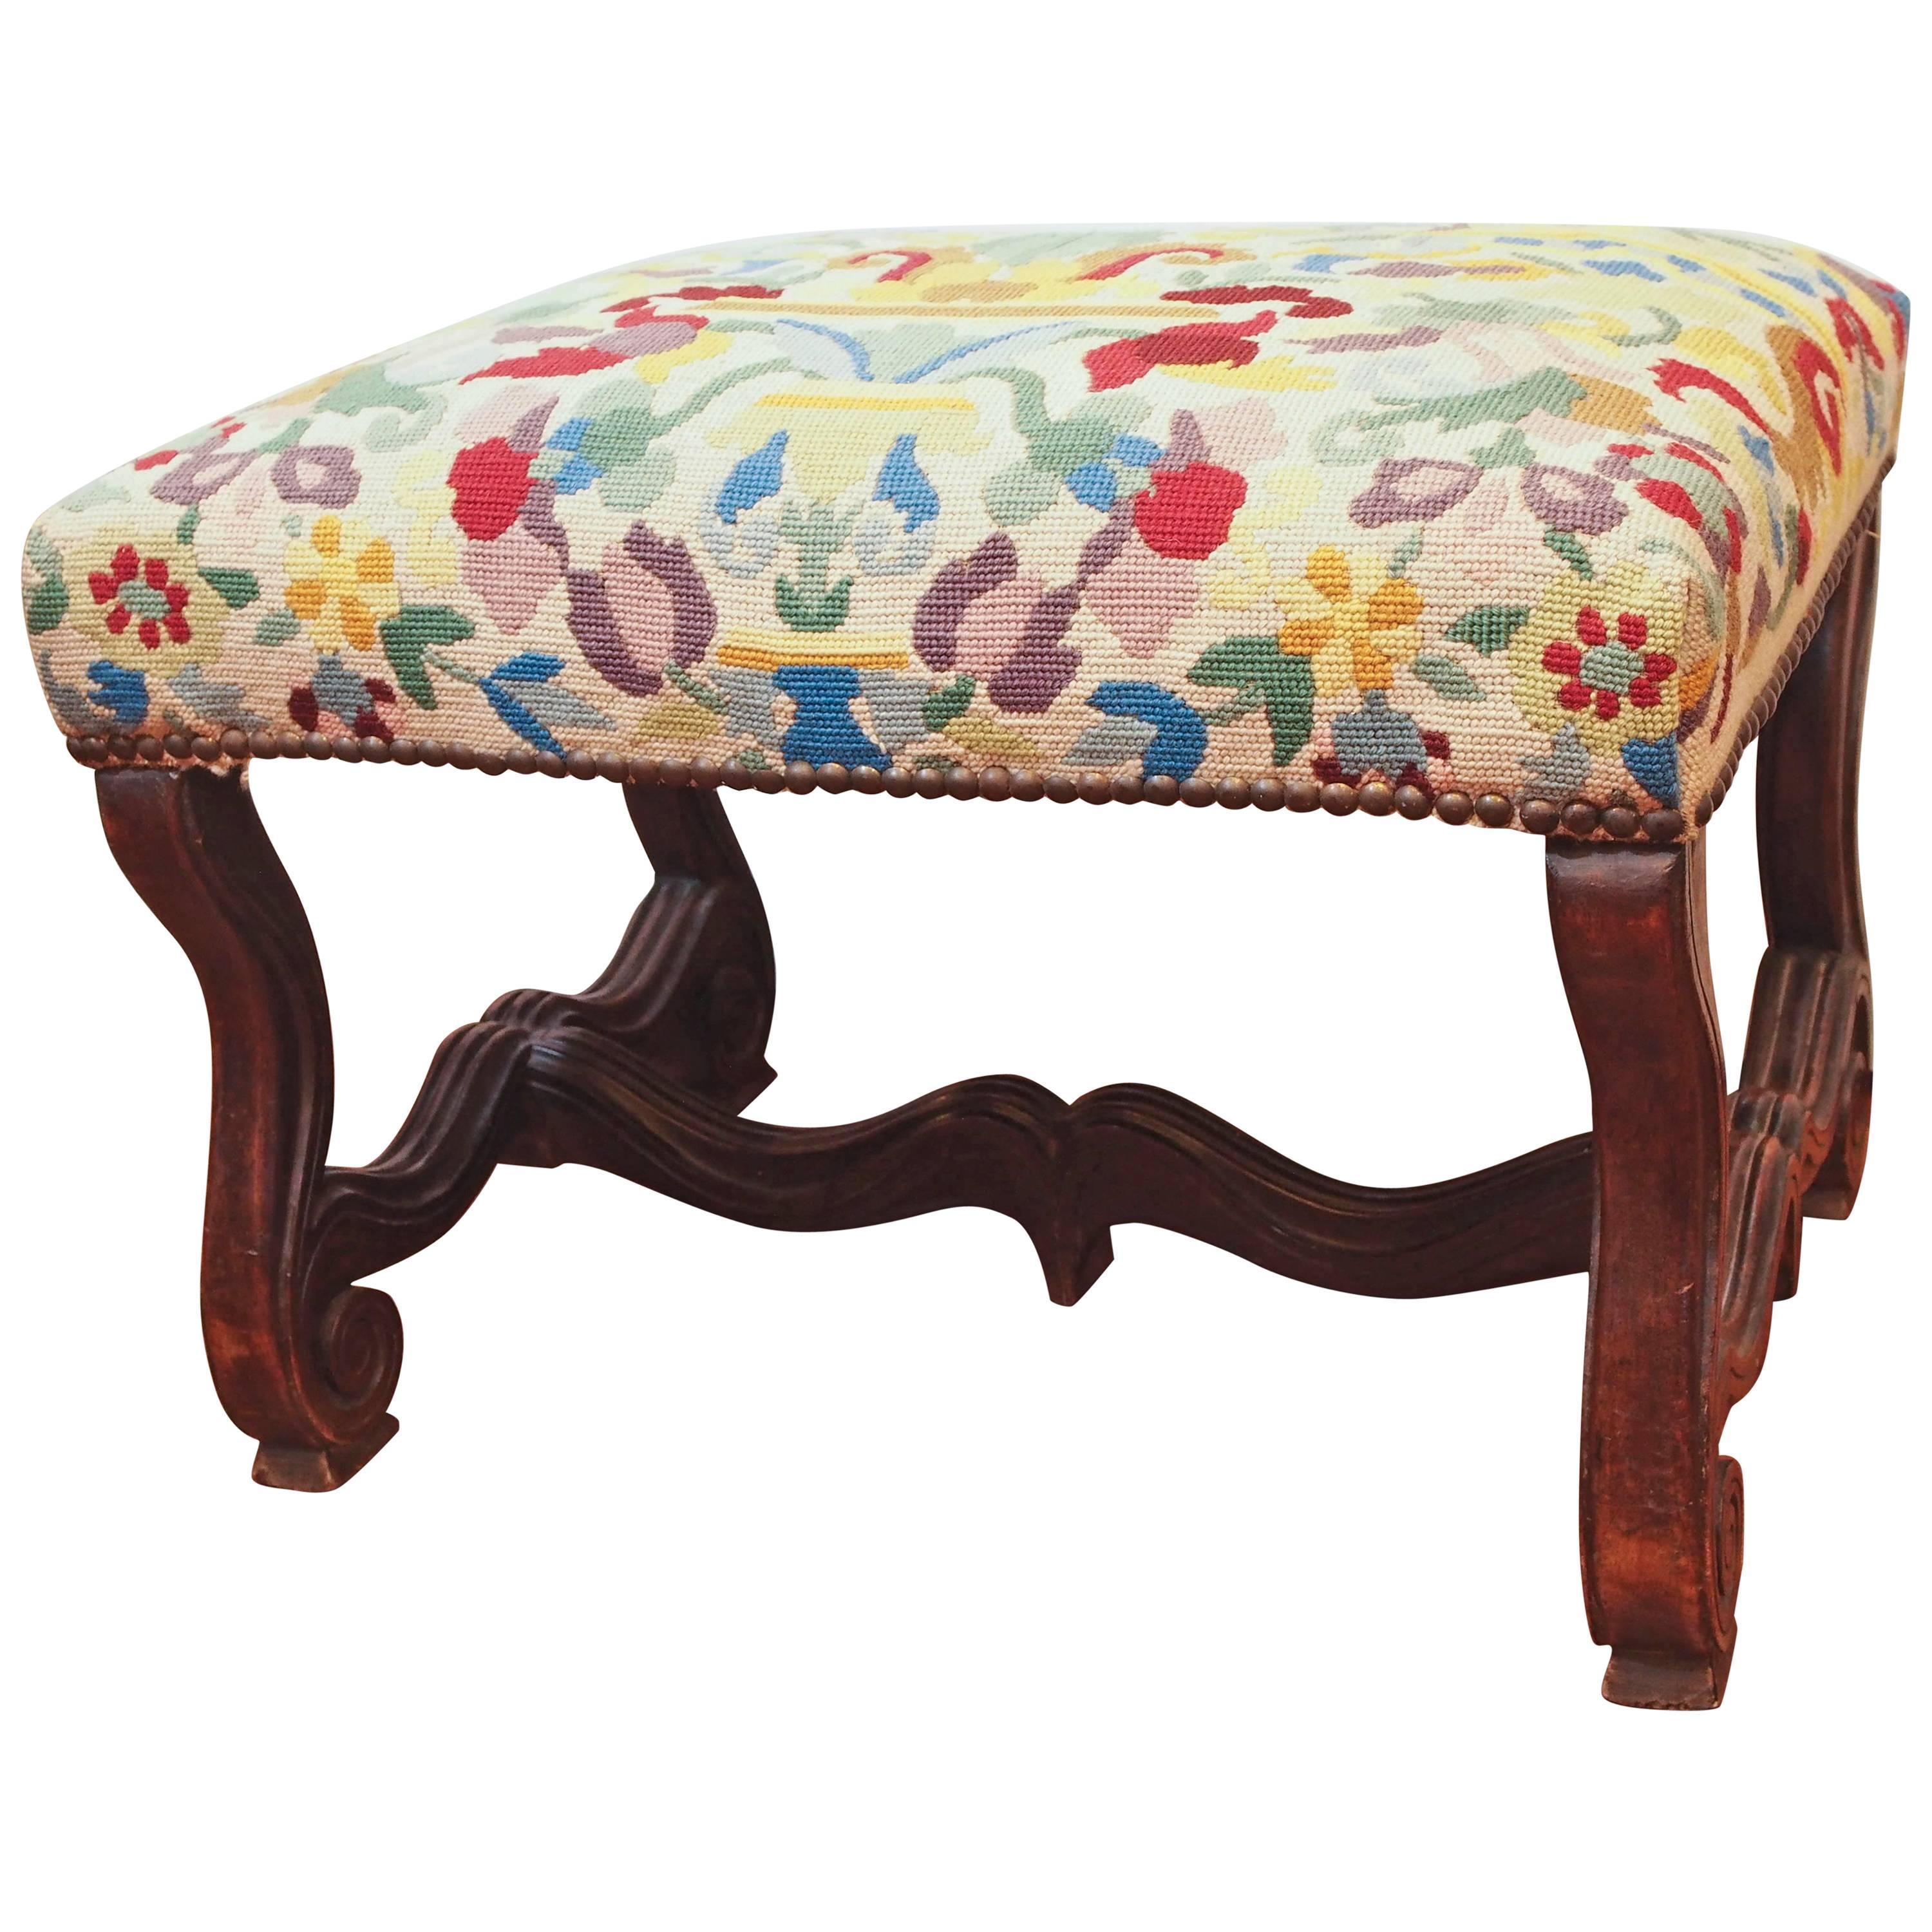 French Walnut Stool with Needlepoint Cover